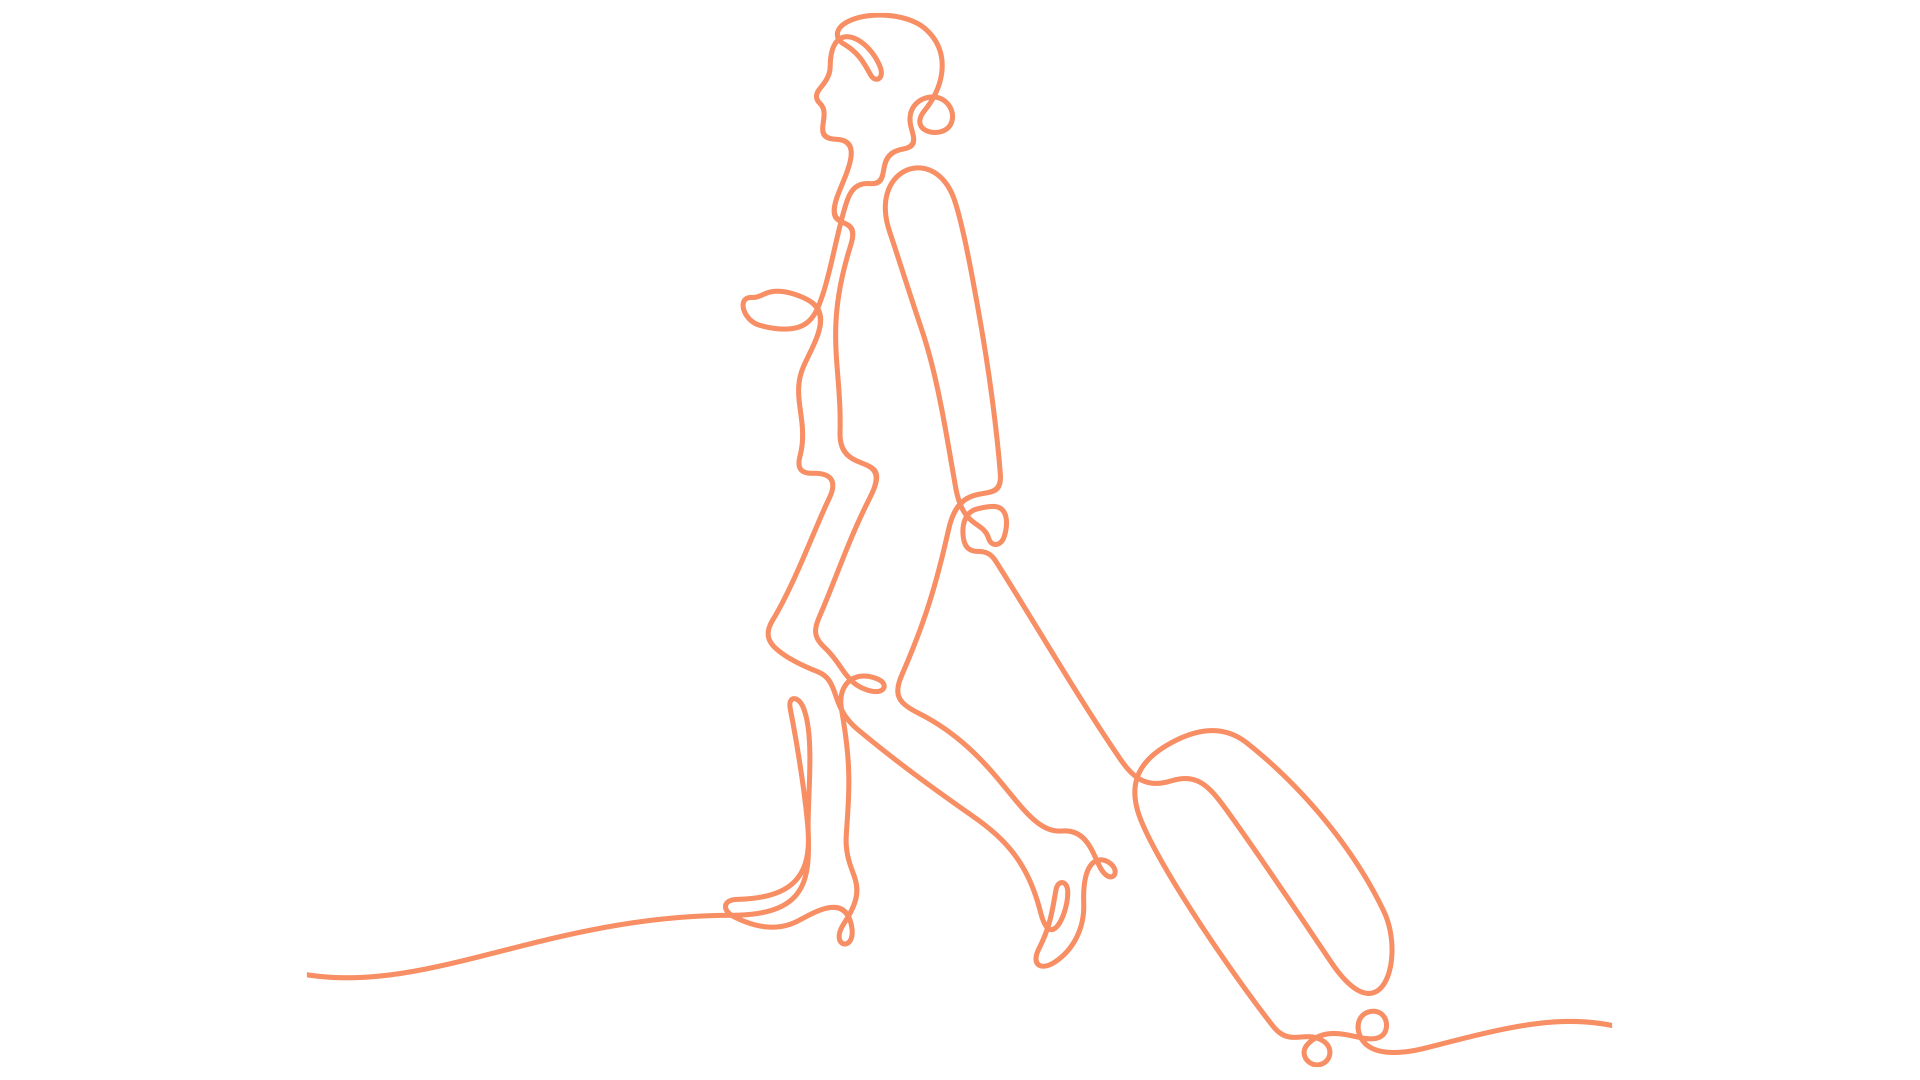 Image of woman pulling luggage